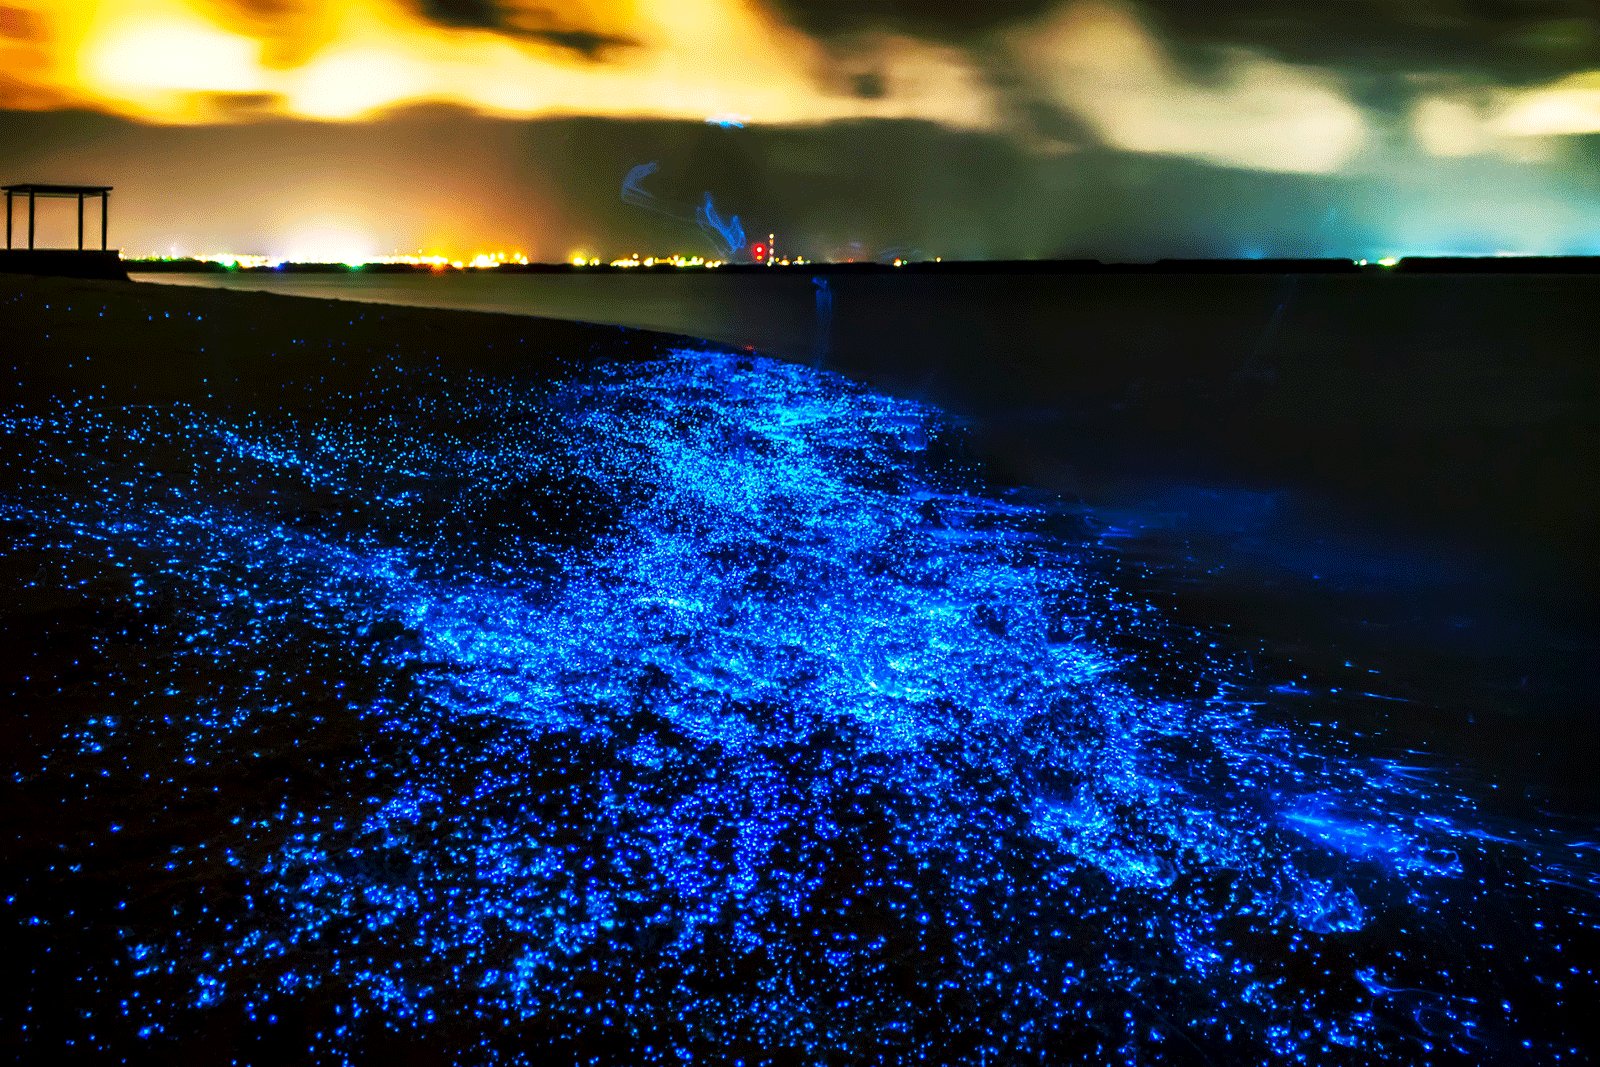 How to watch firefly squids in Tokyo